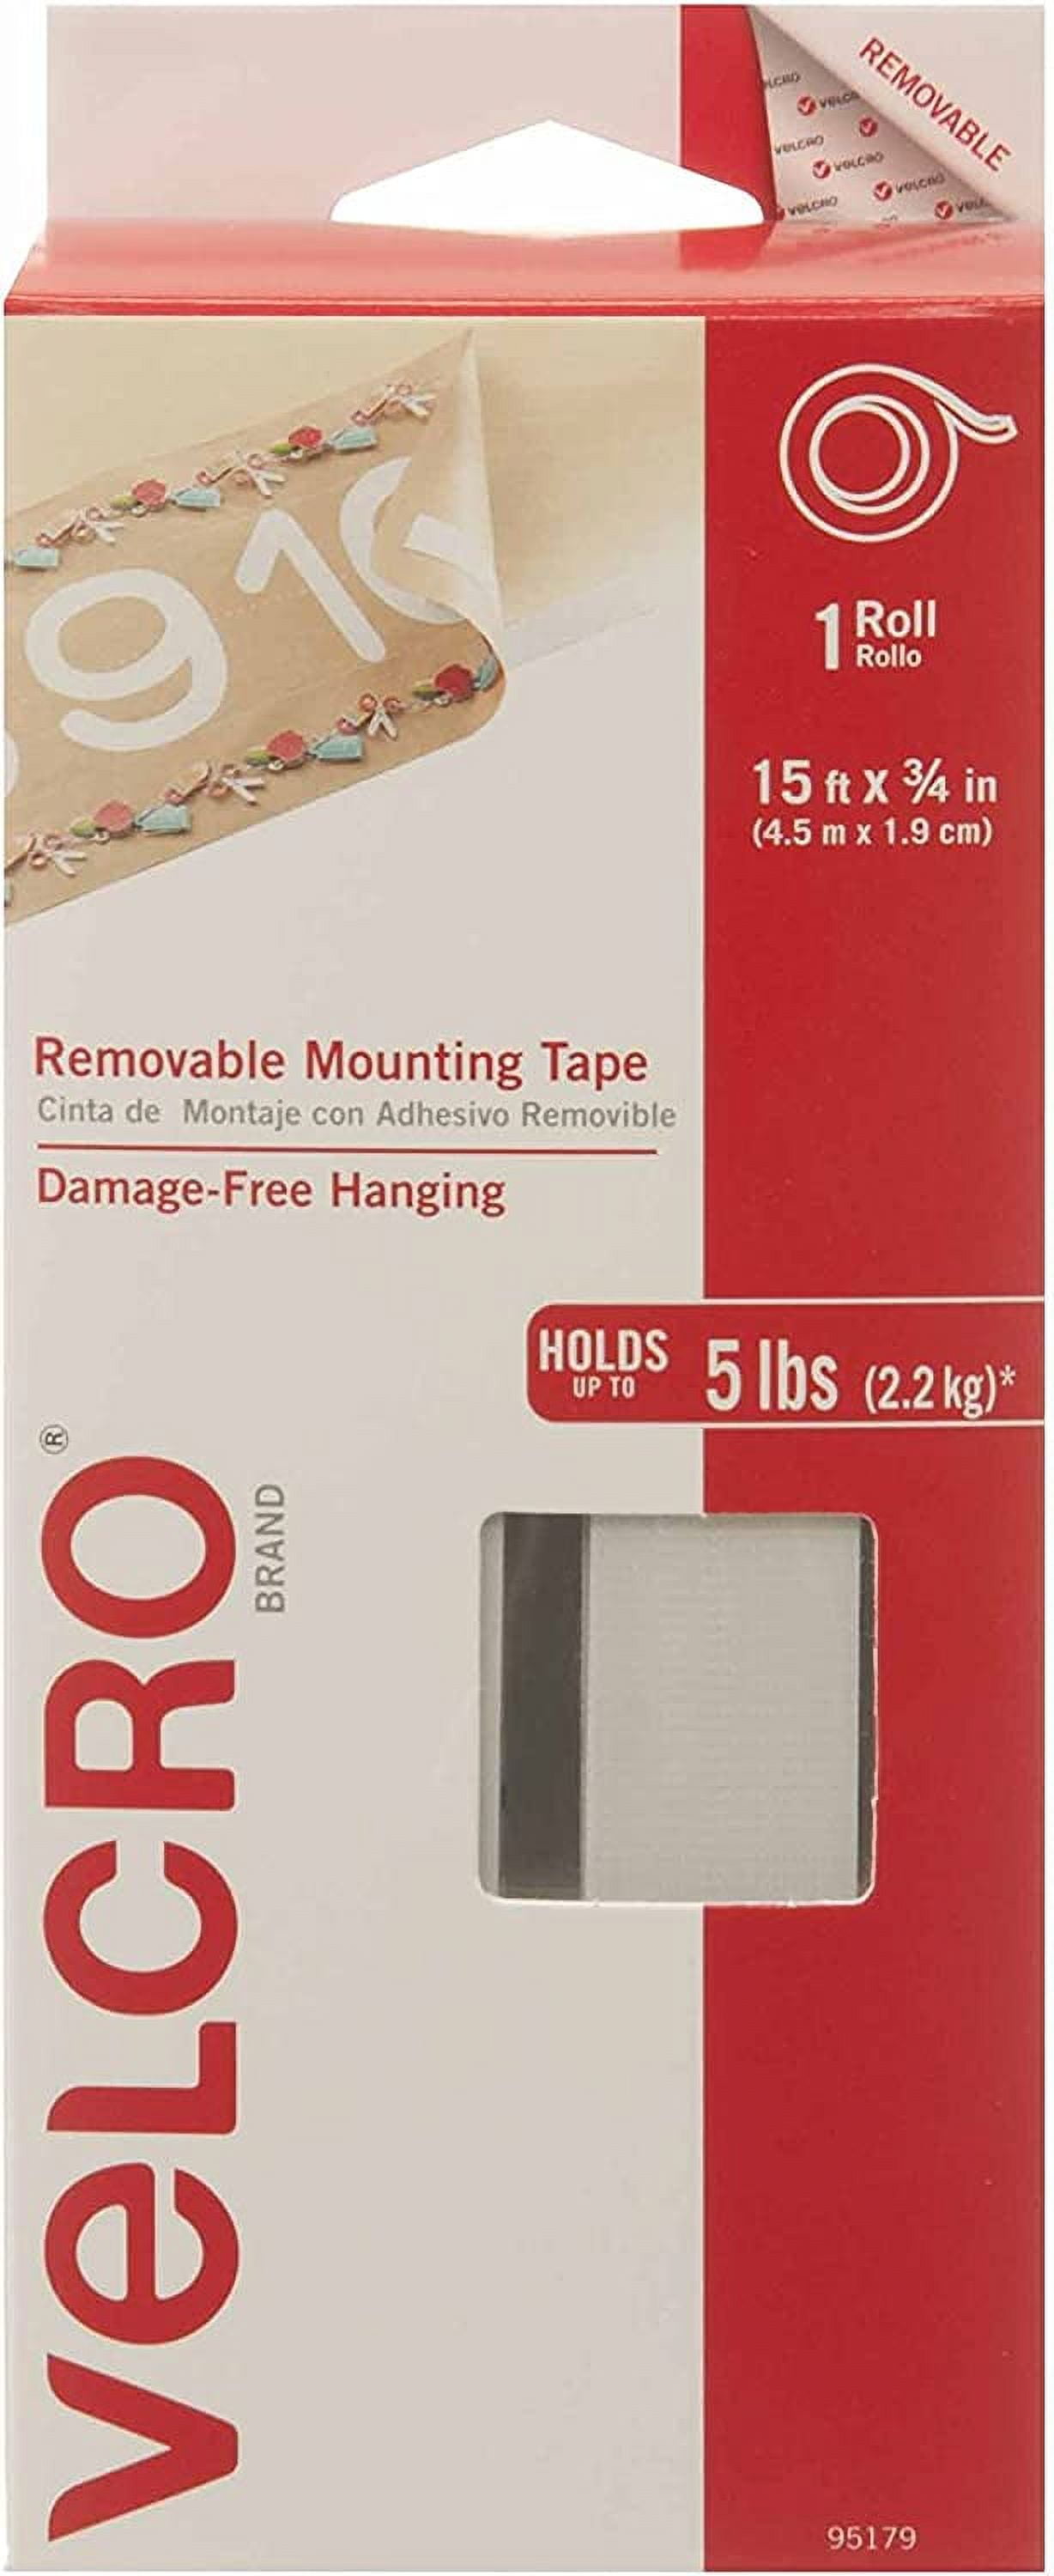 VELCRO® Brand Removable Mounting Tape 15ft x 3/4in Roll. White